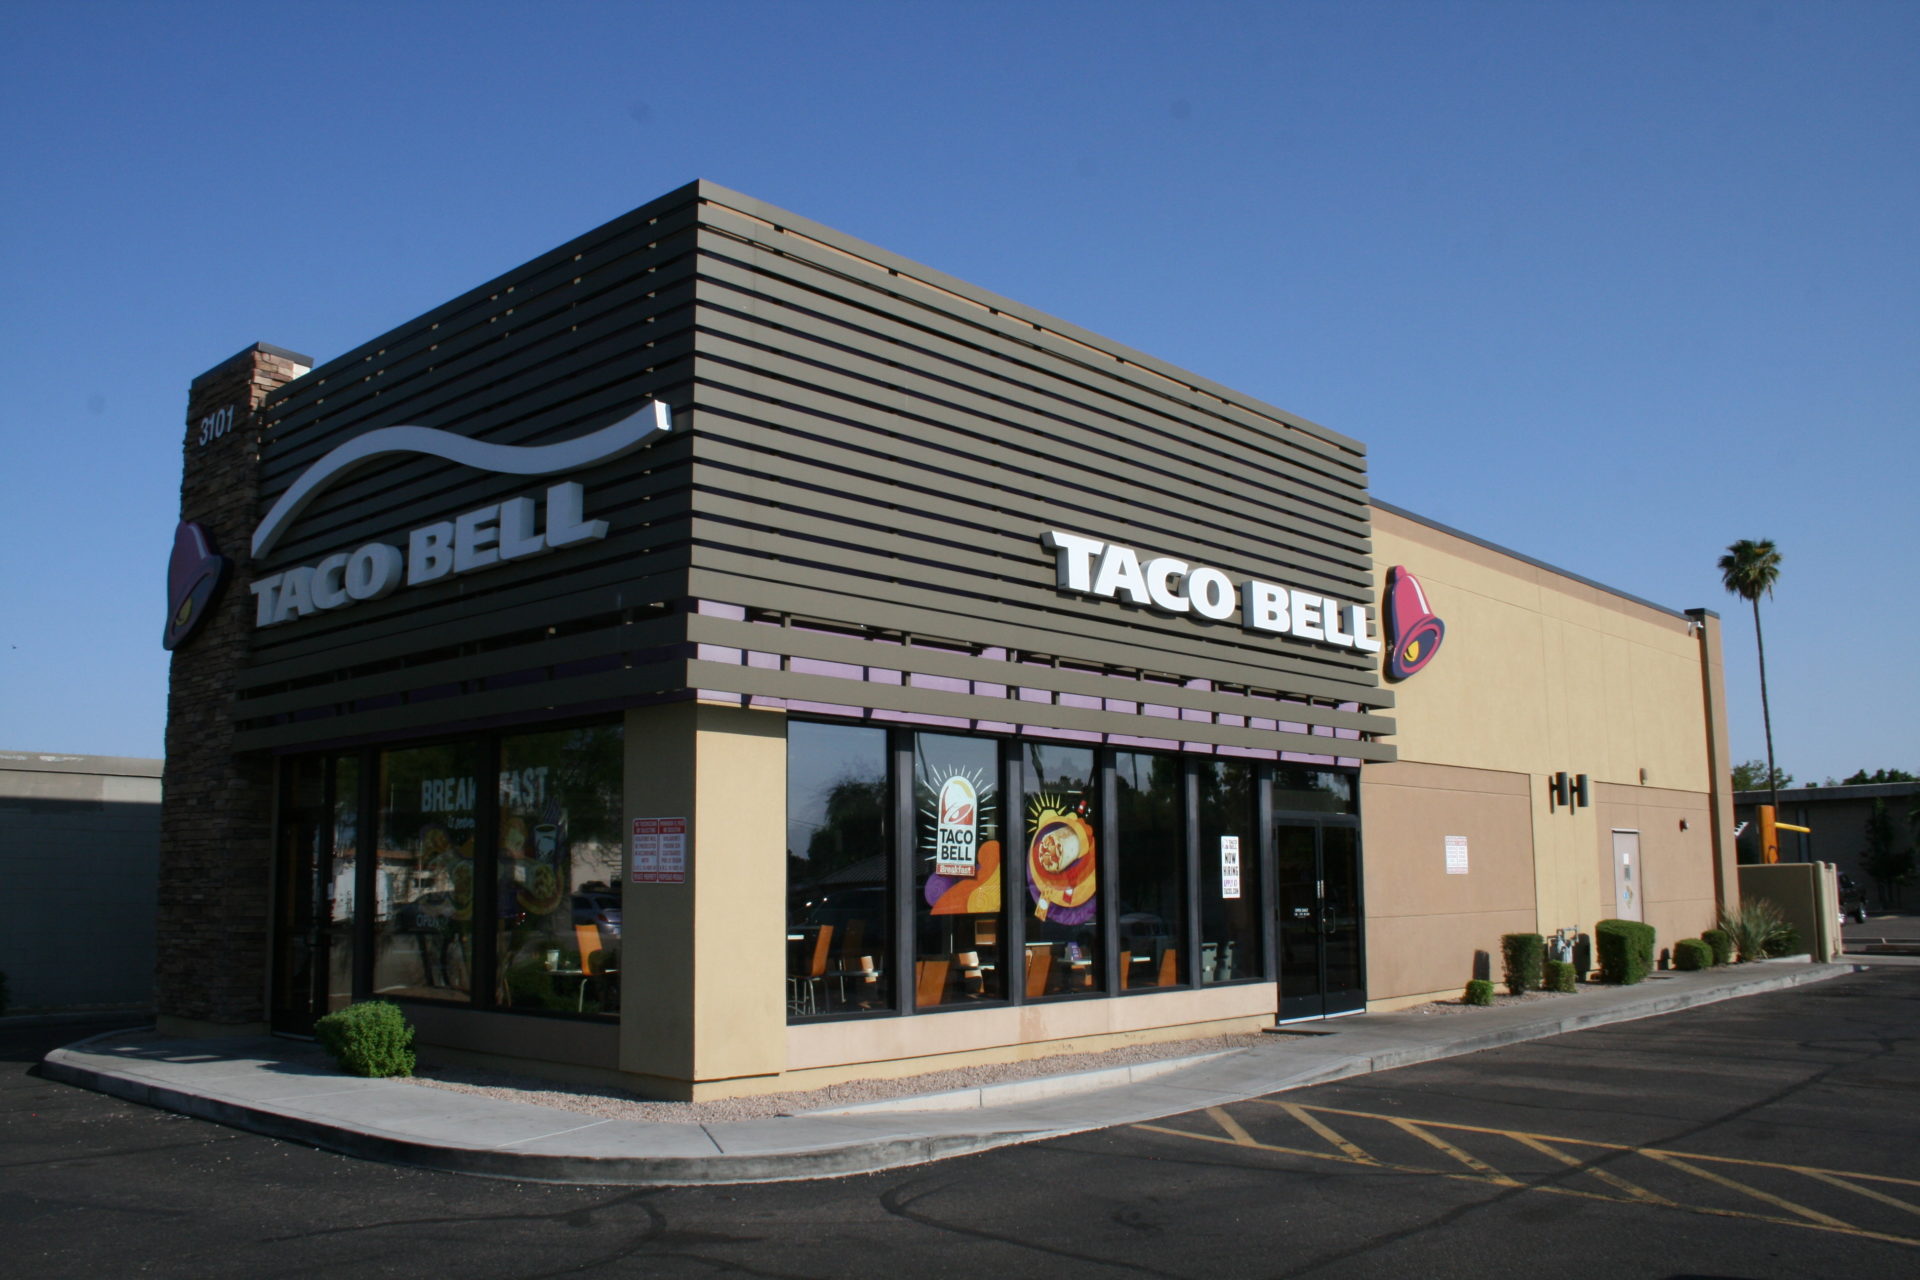 A taco bell restaurant with a parking lot in front.